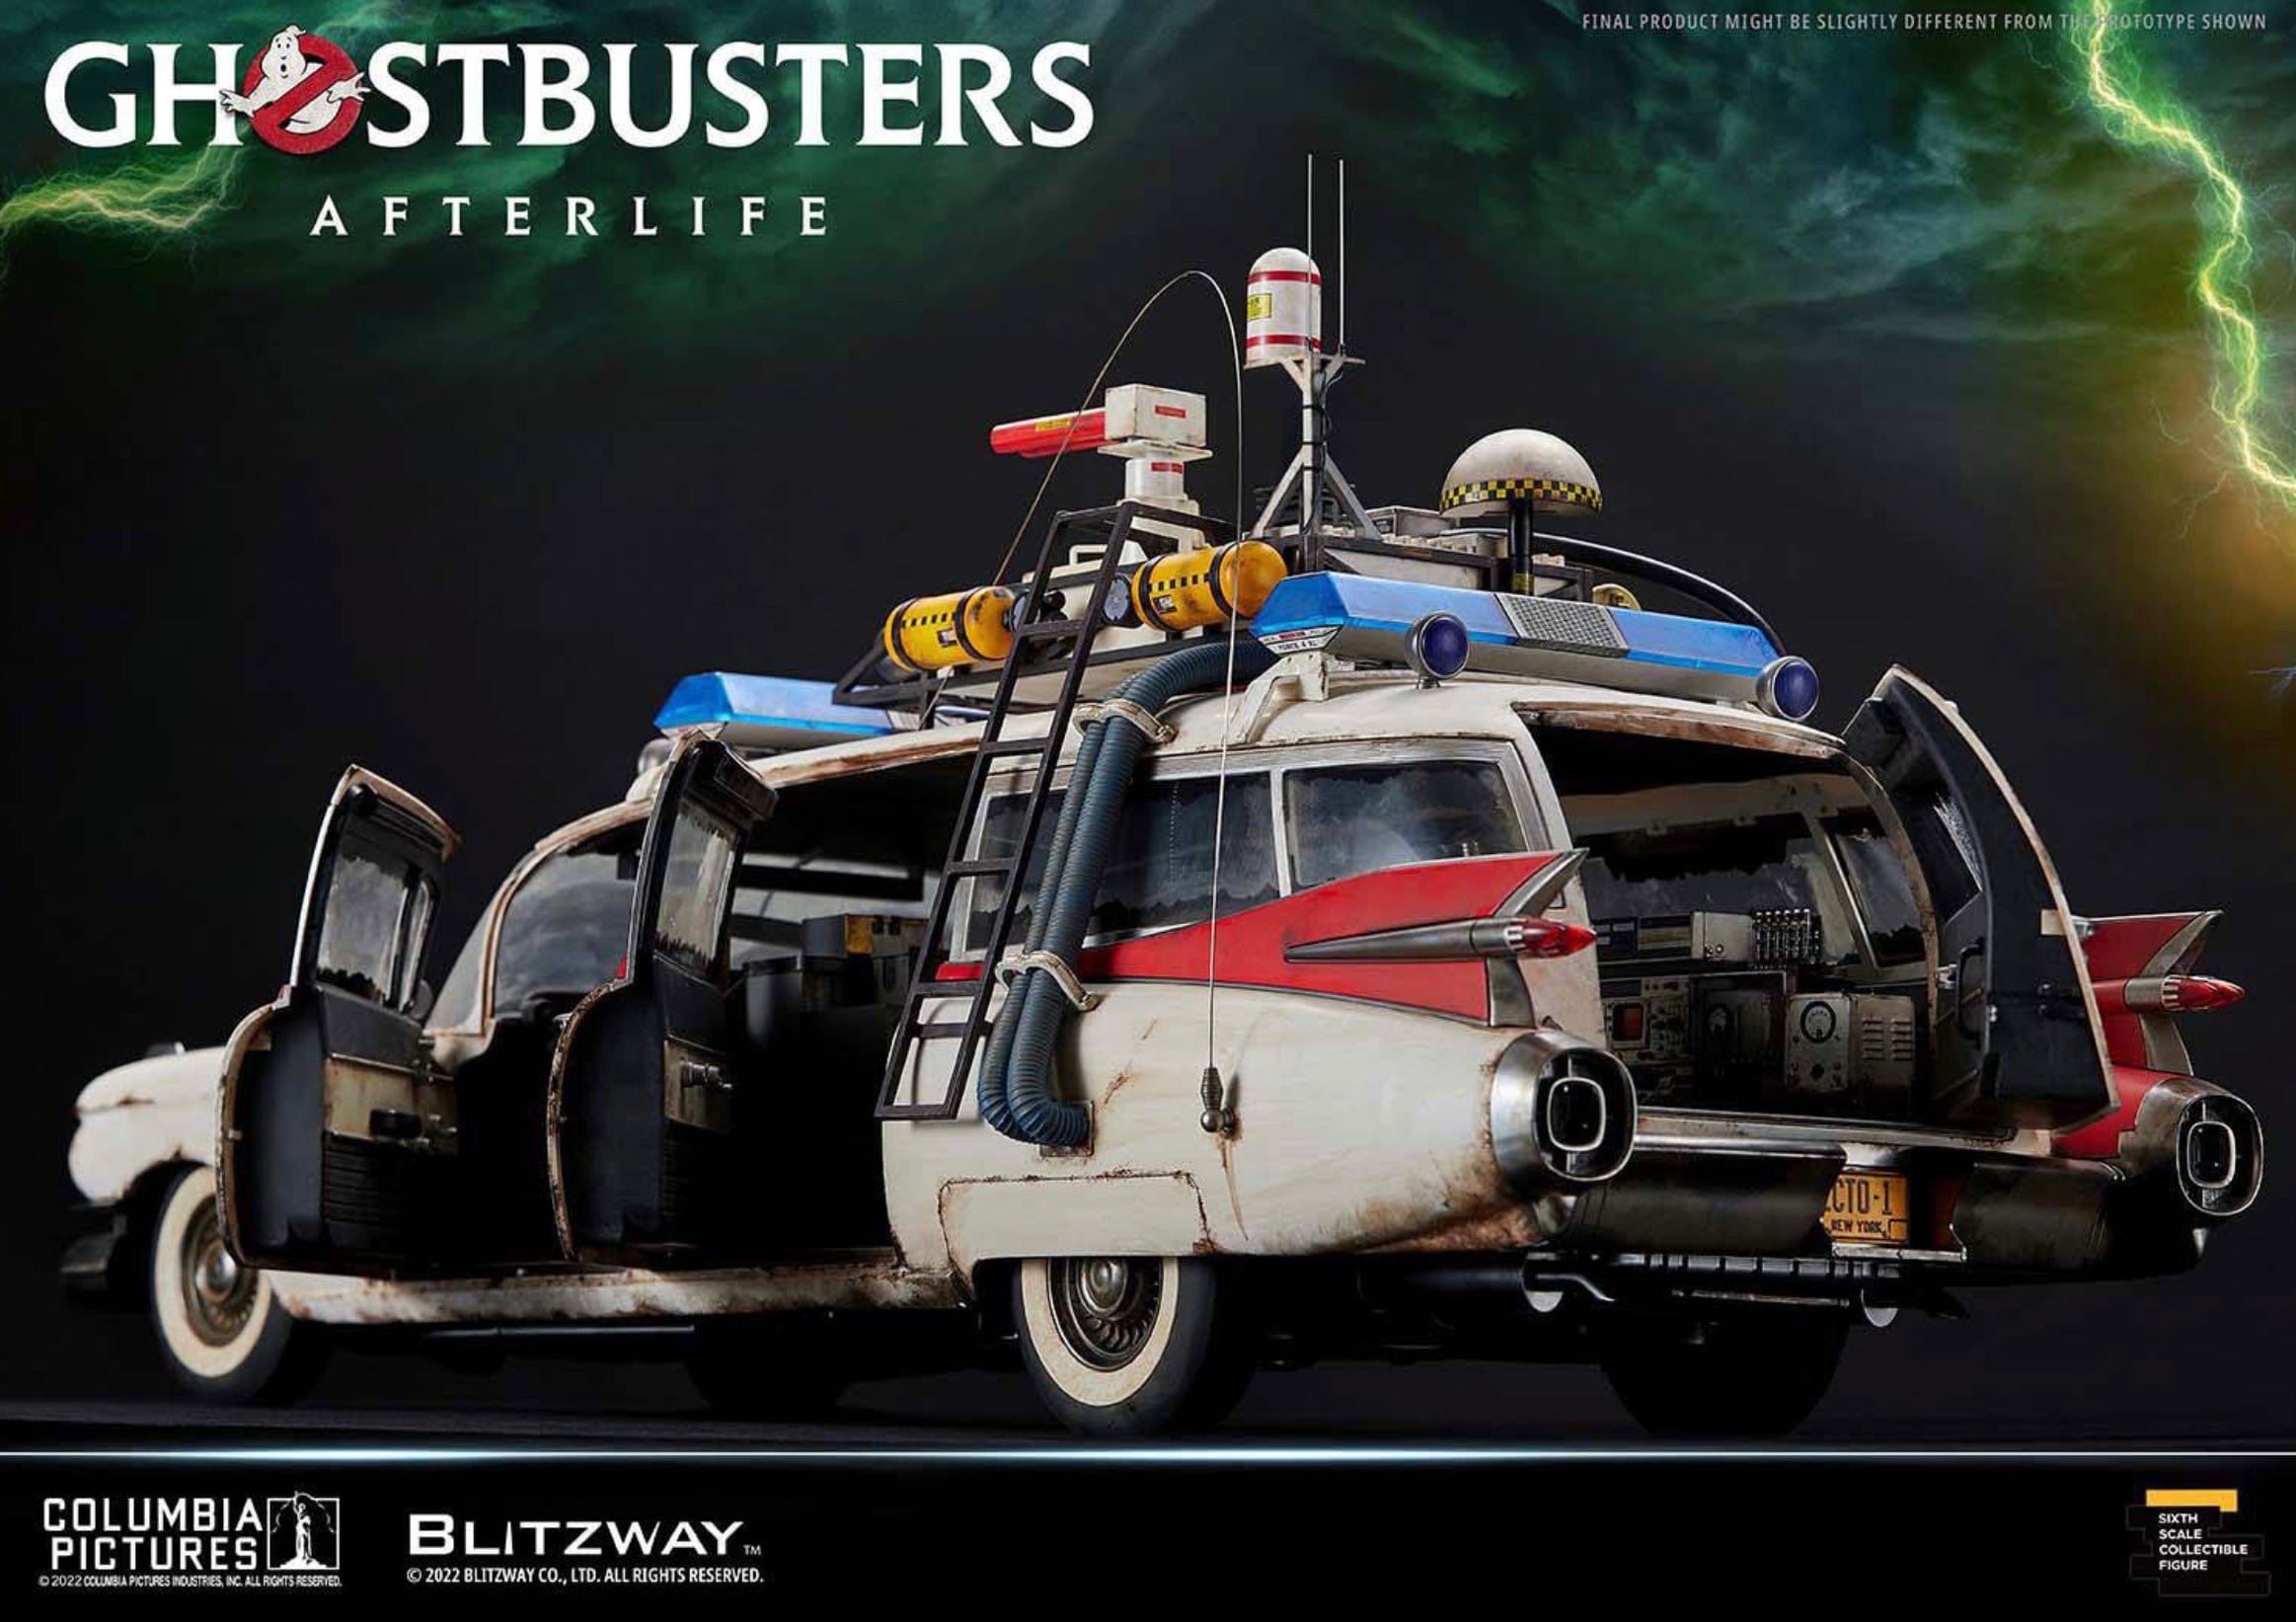 Ghostbusters: Afterlife Vehicles - 1/6 Scale ECTO-1 1959 CADILLAC 116 CM